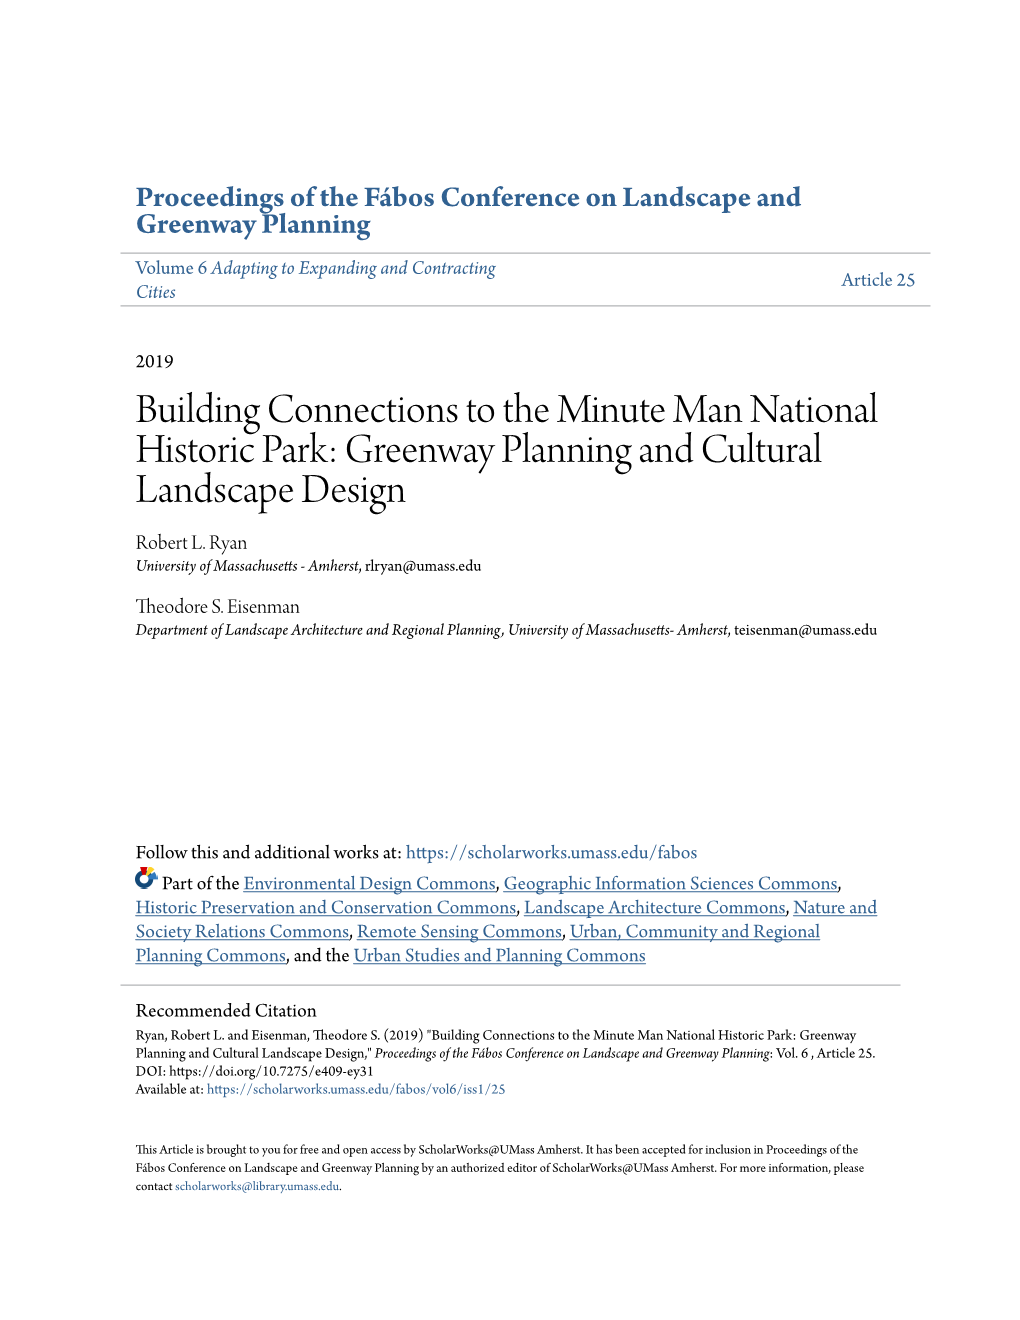 Building Connections to the Minute Man National Historic Park: Greenway Planning and Cultural Landscape Design Robert L